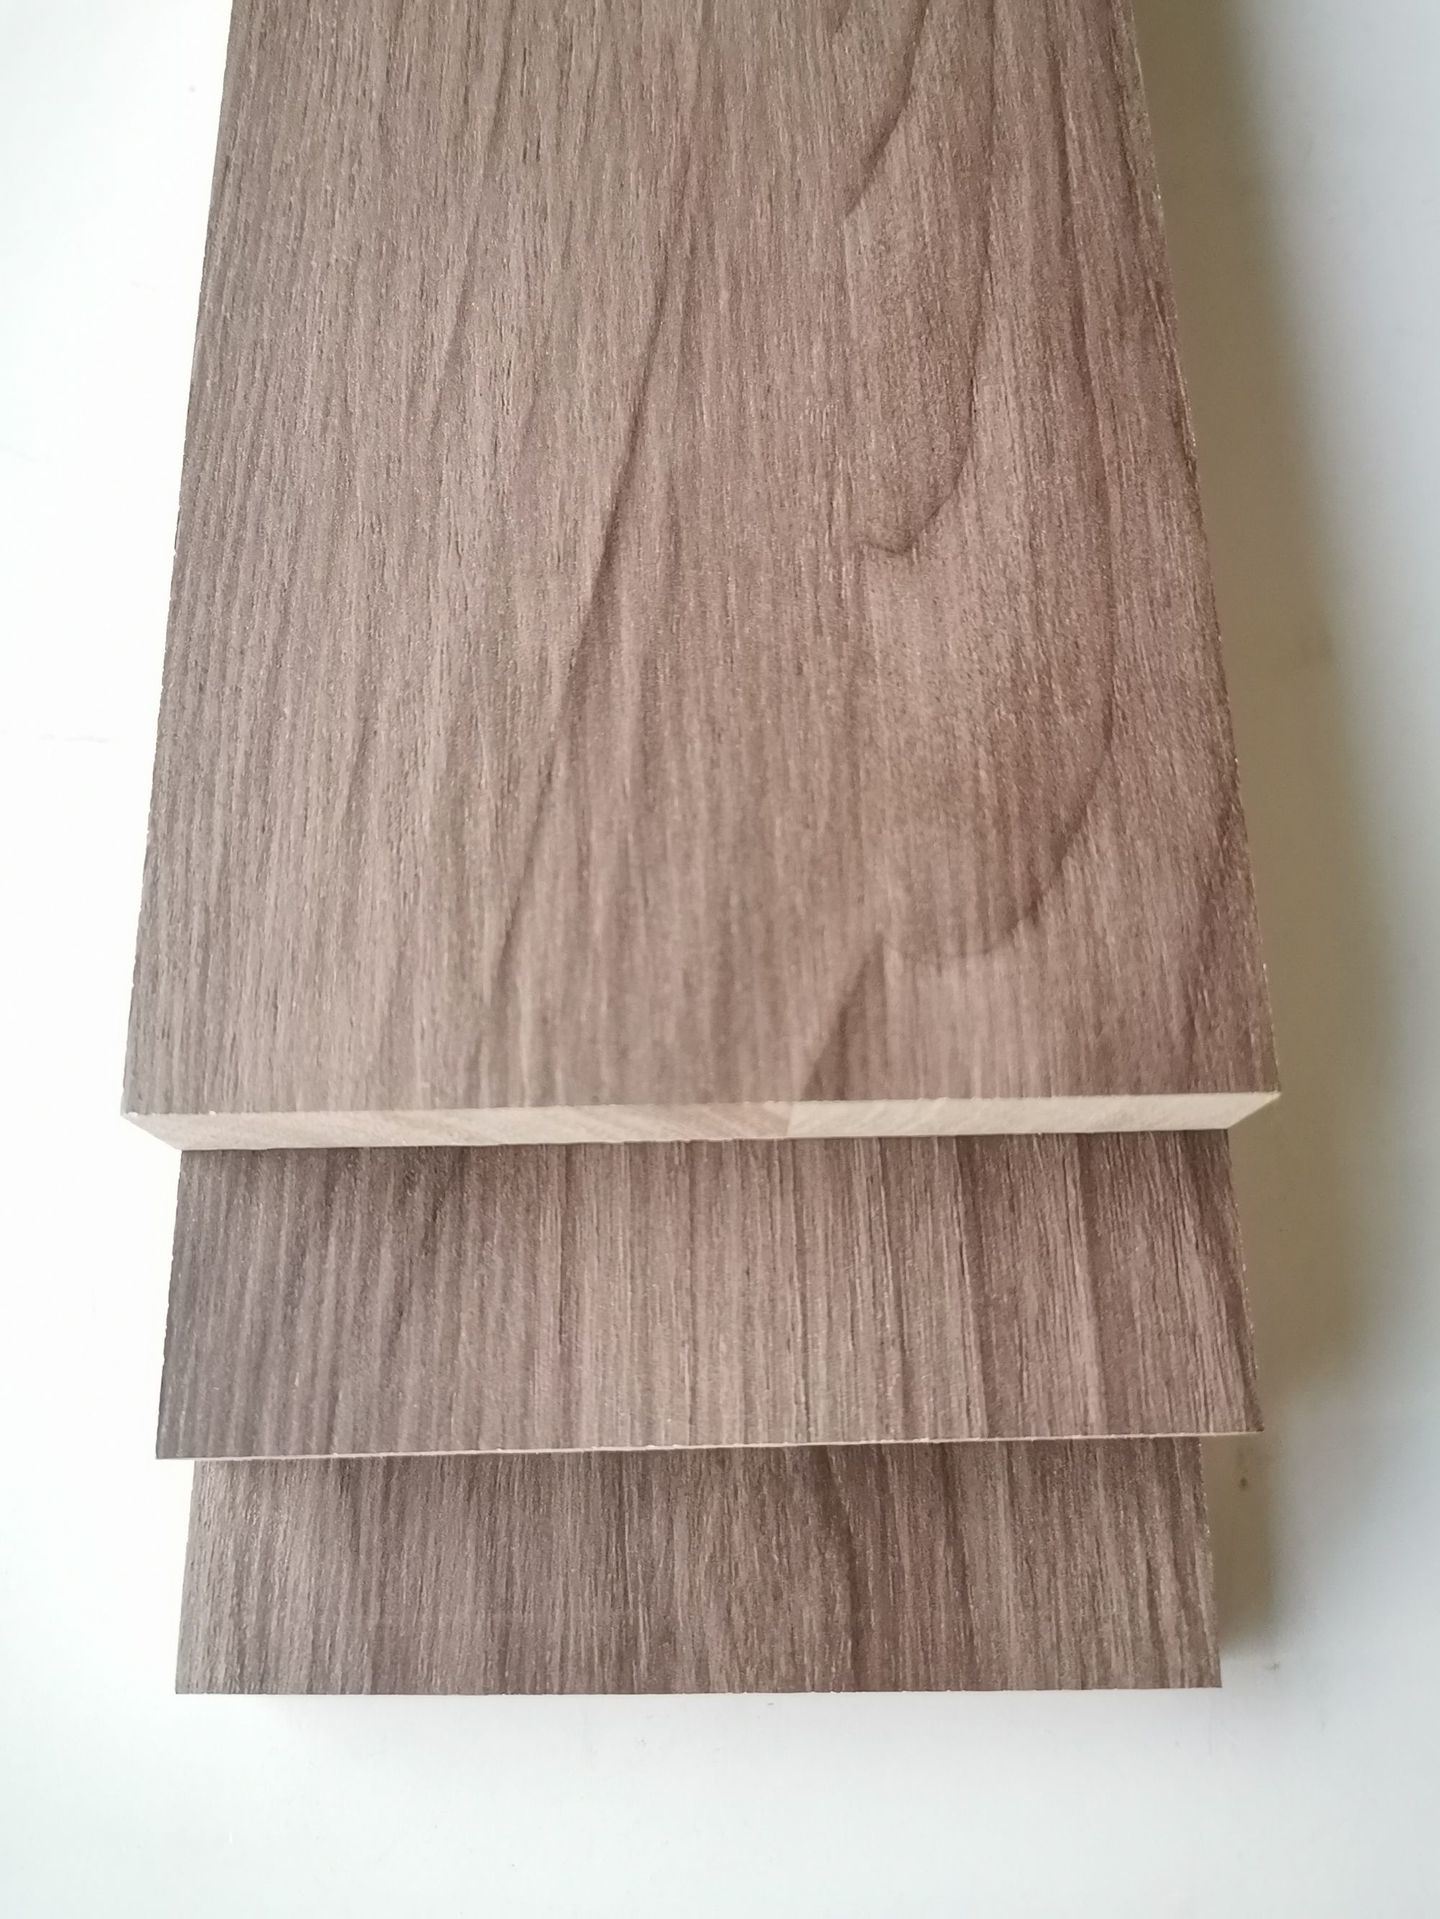 WBP CNC White Melamine Faced Plywood for Furniture